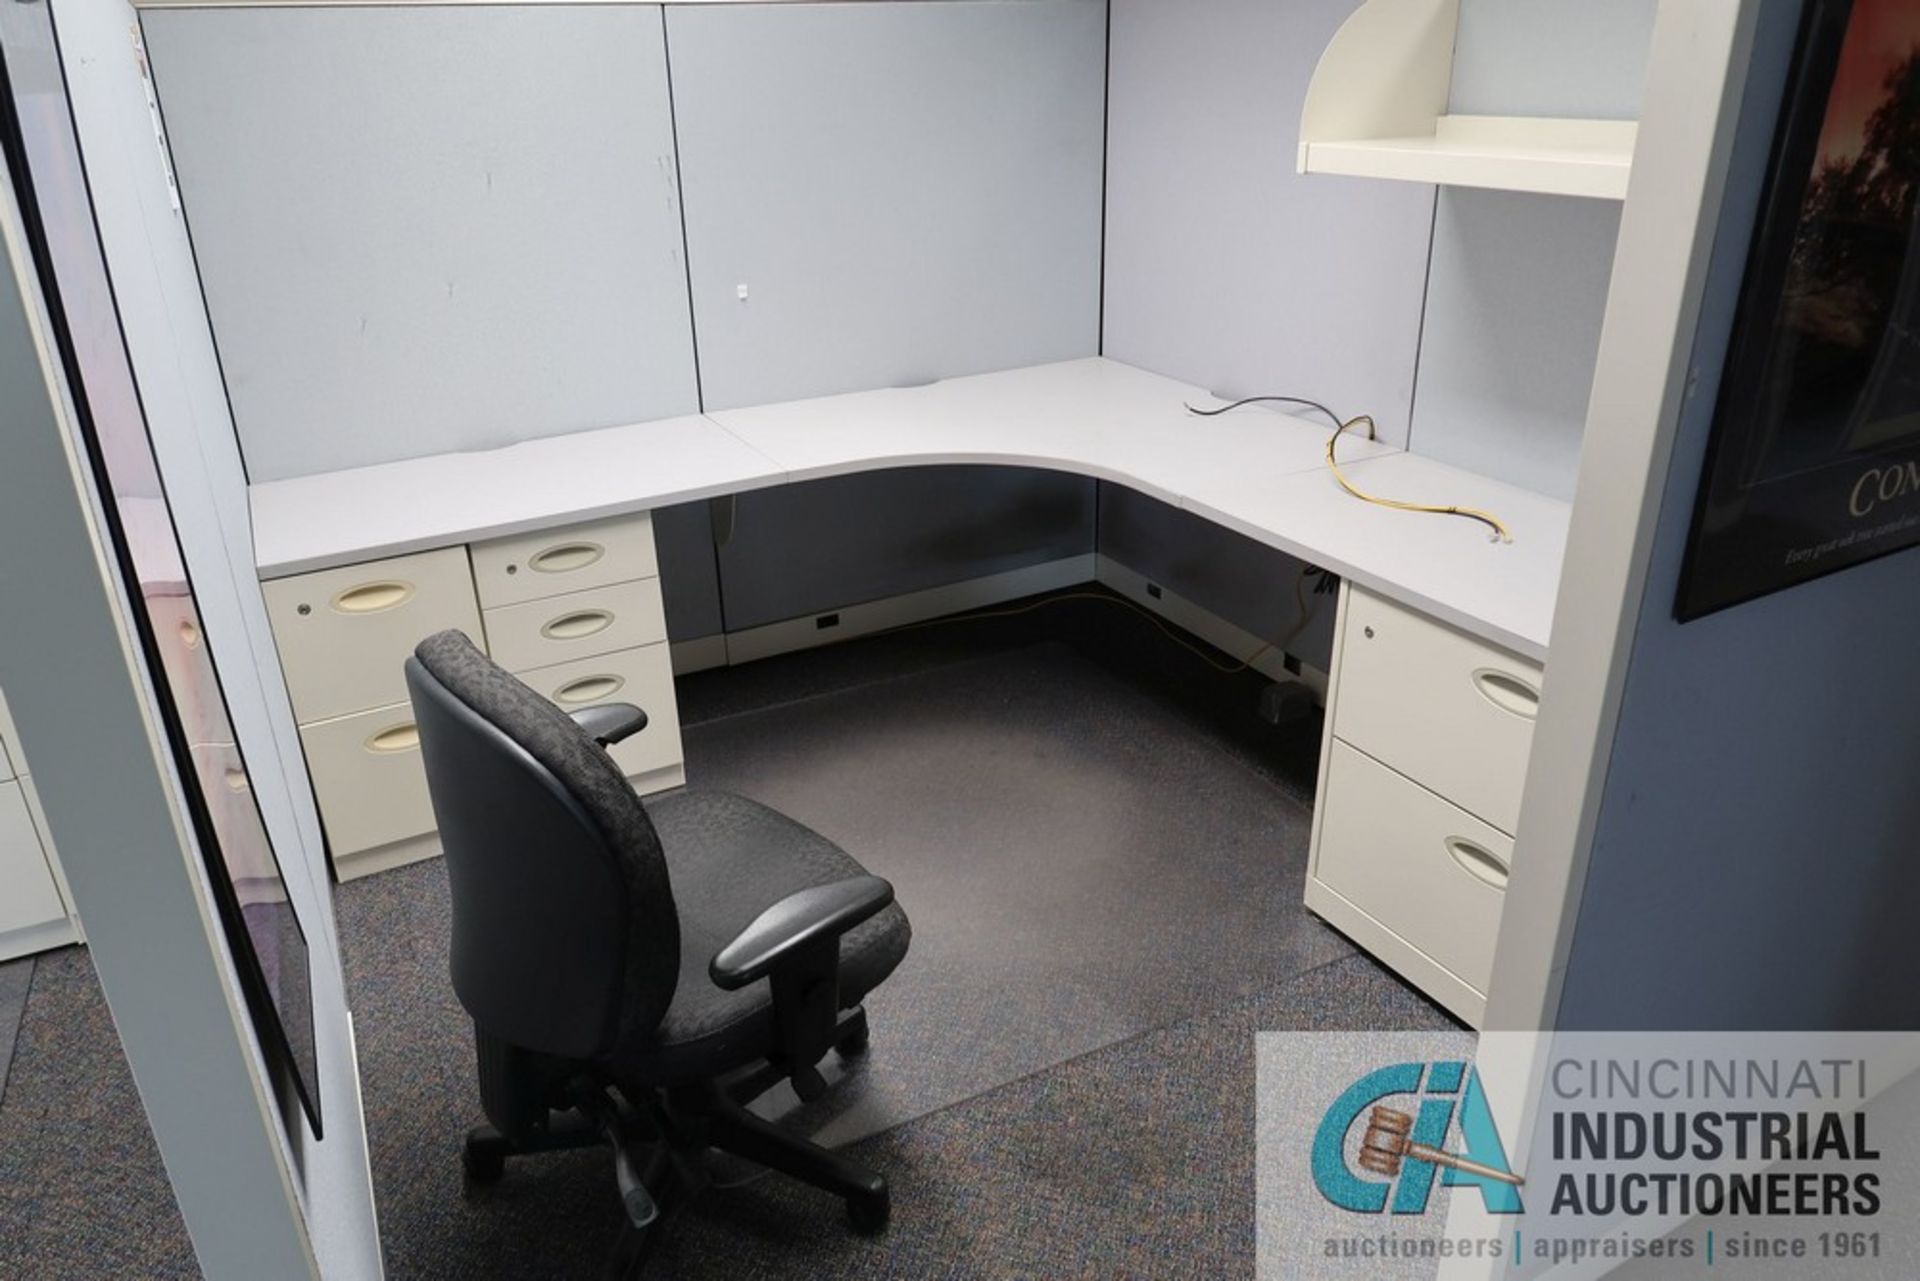 PERSON 96" X 92" MODULAR OFFICE CUBICLES WITH (2) CHAIRS - Image 2 of 3